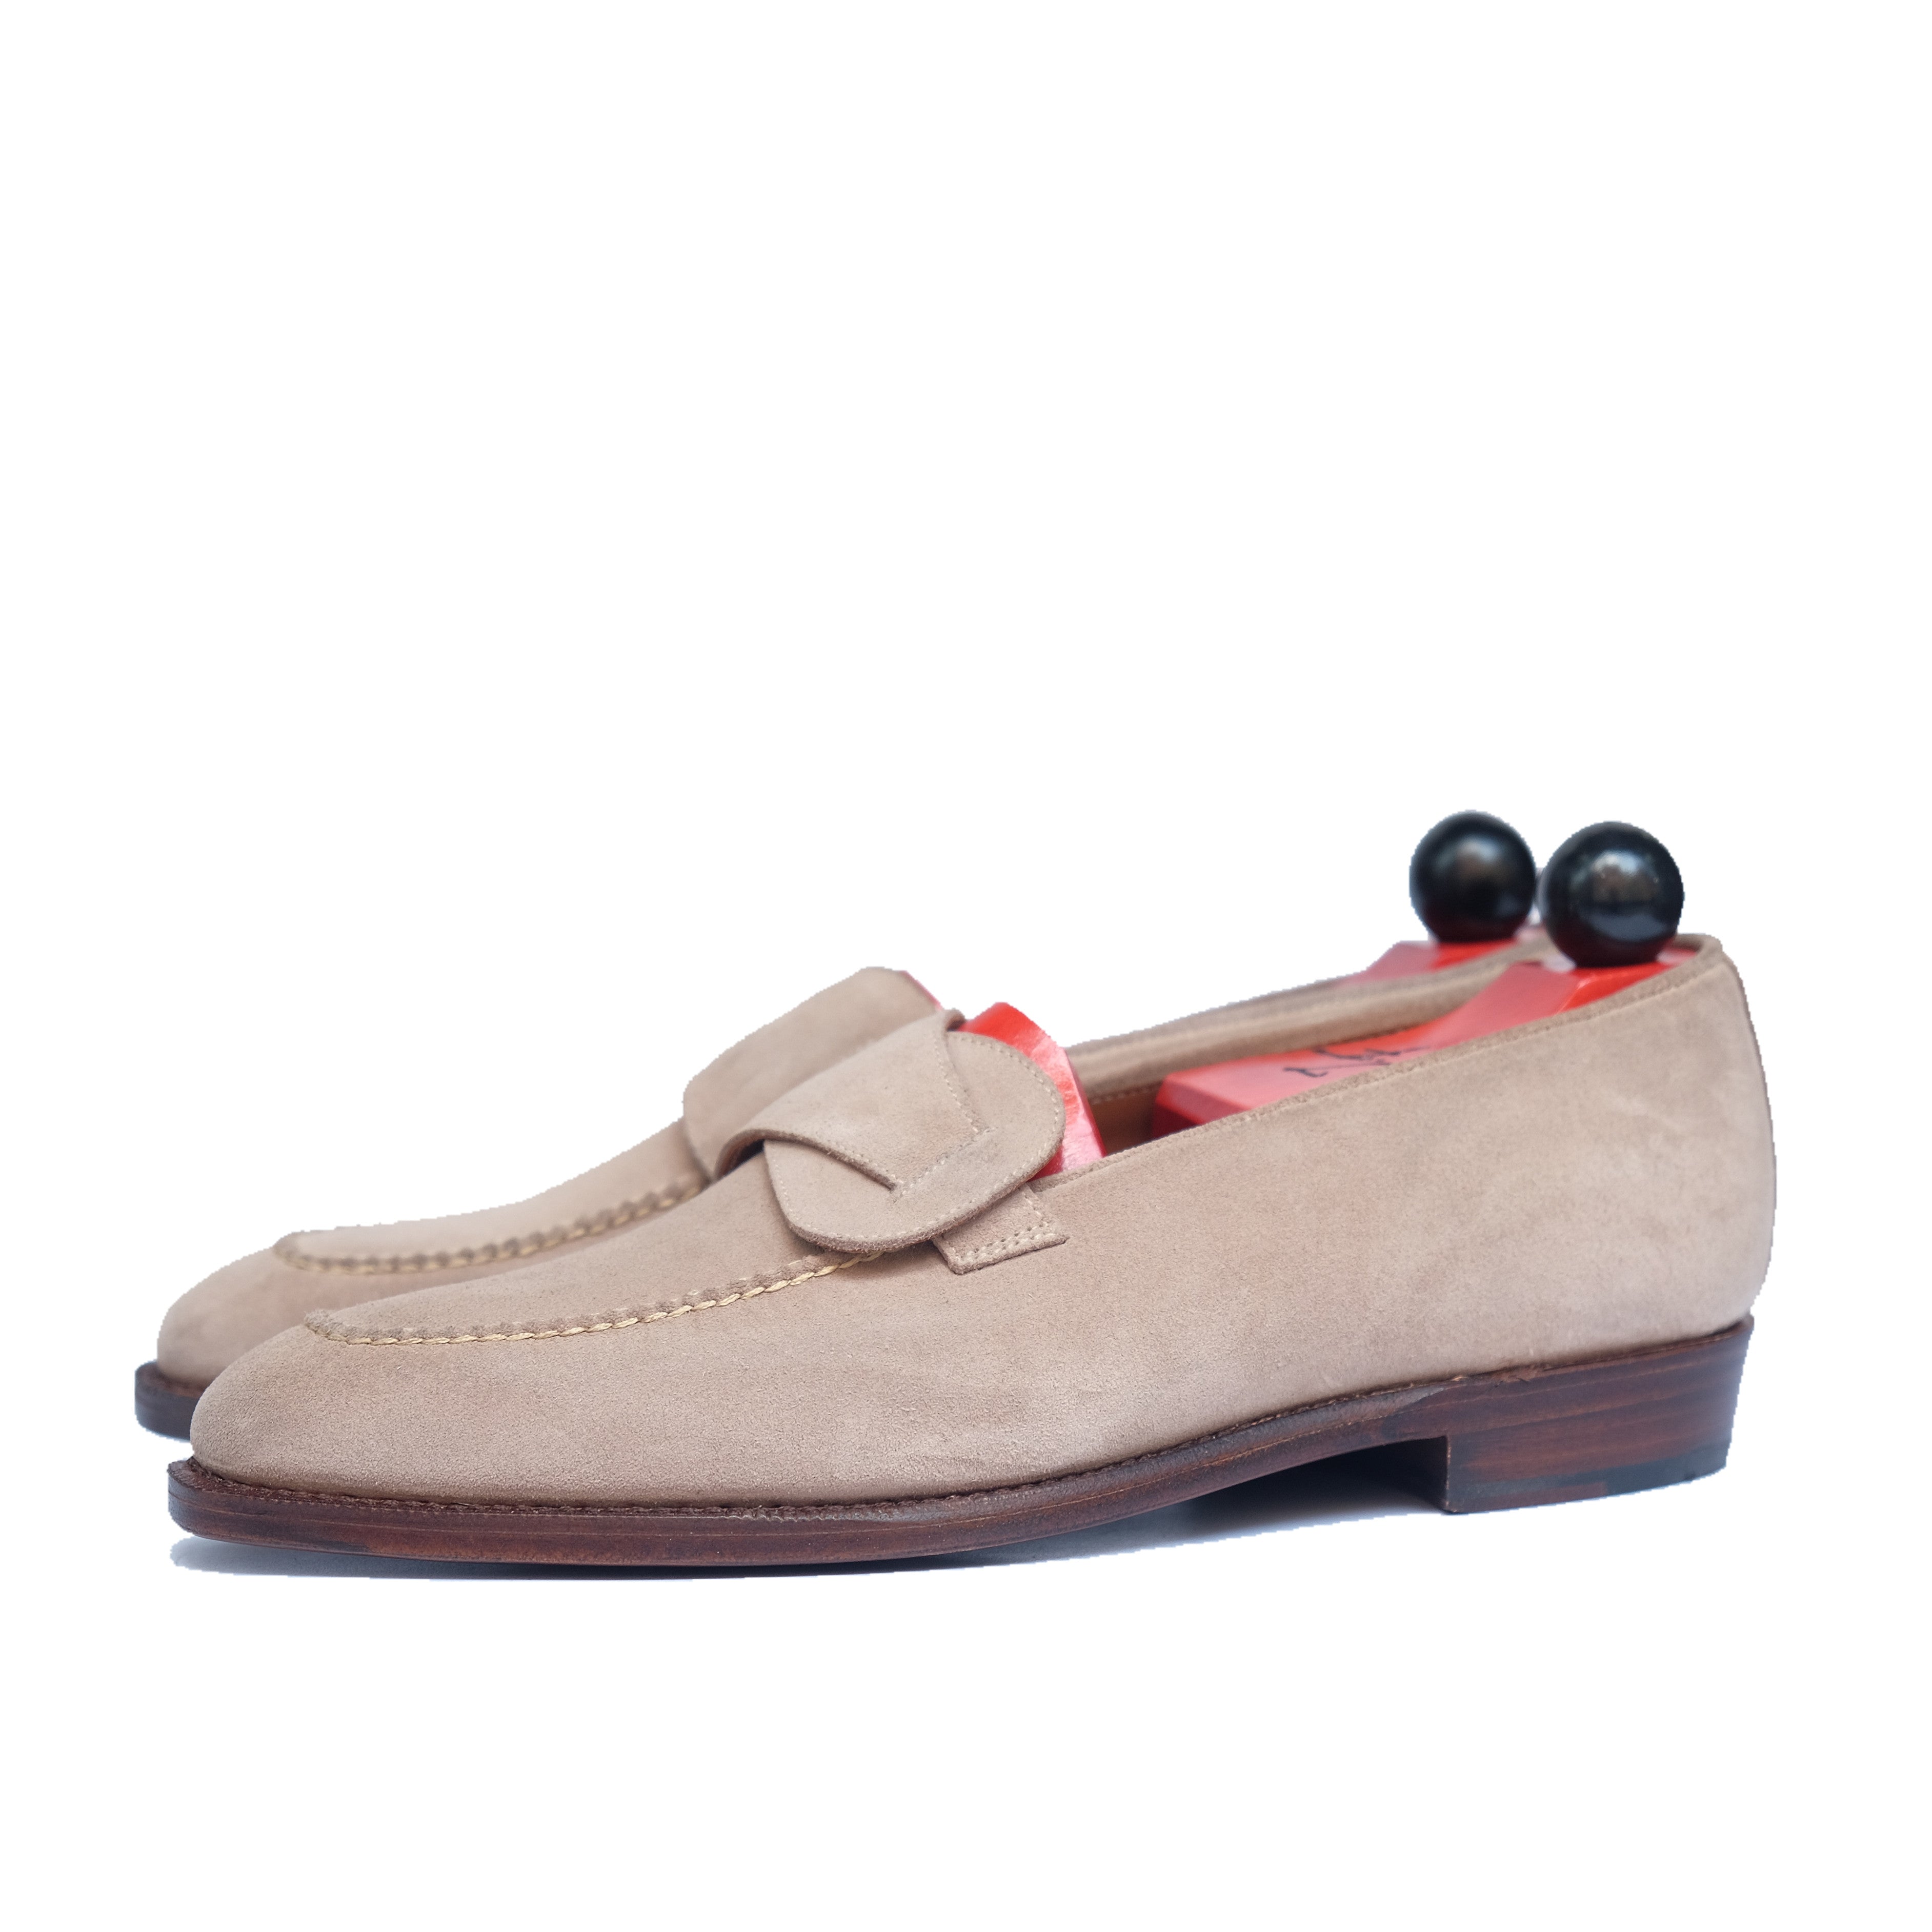 Hawthorne - Oatmeal Suede / Natural Stitching - CLEARANCE